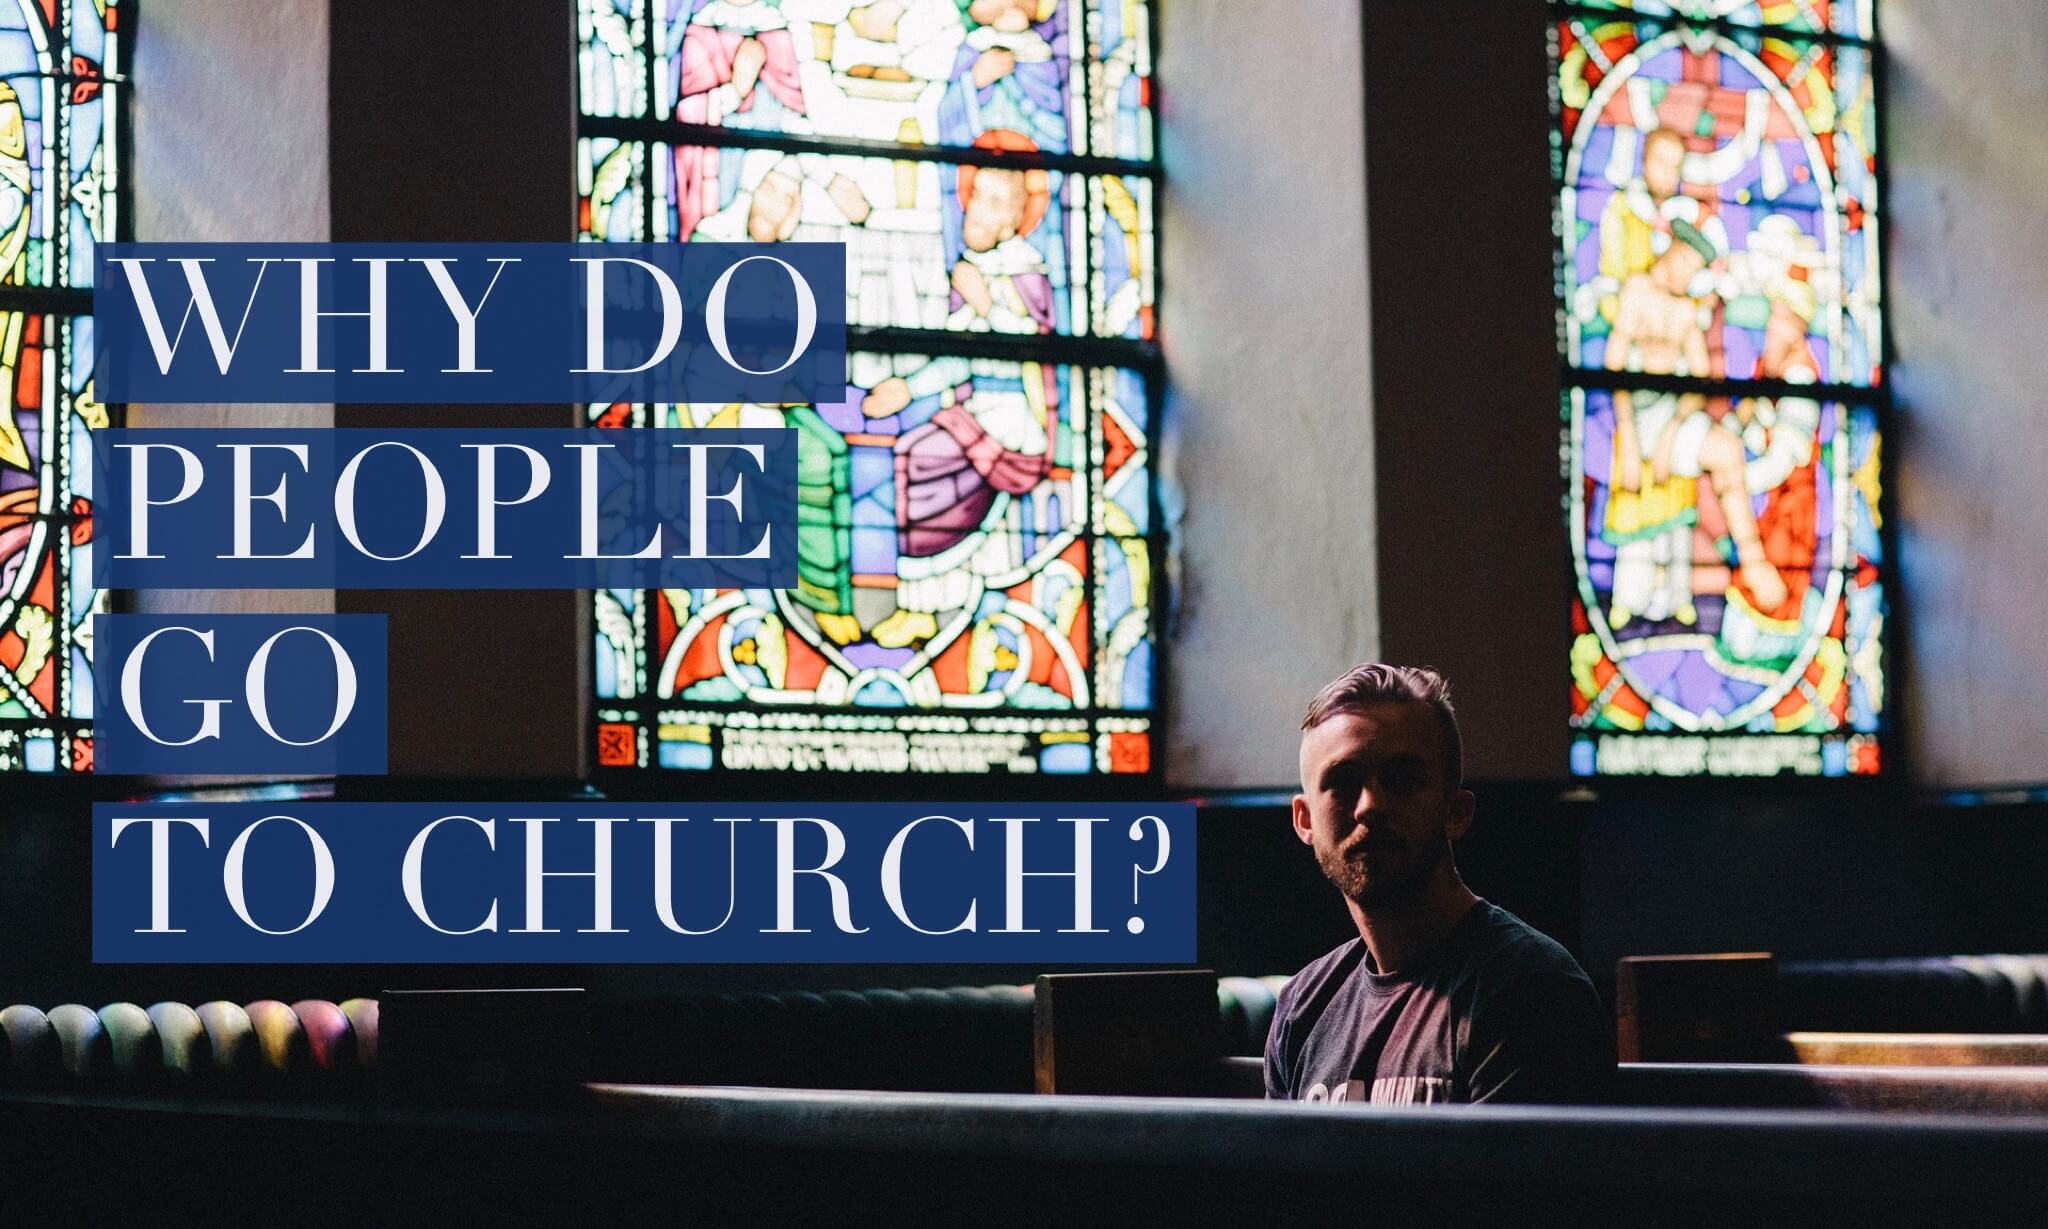 Why Do People Go to Church? This Study Found It’s Not the Sermon